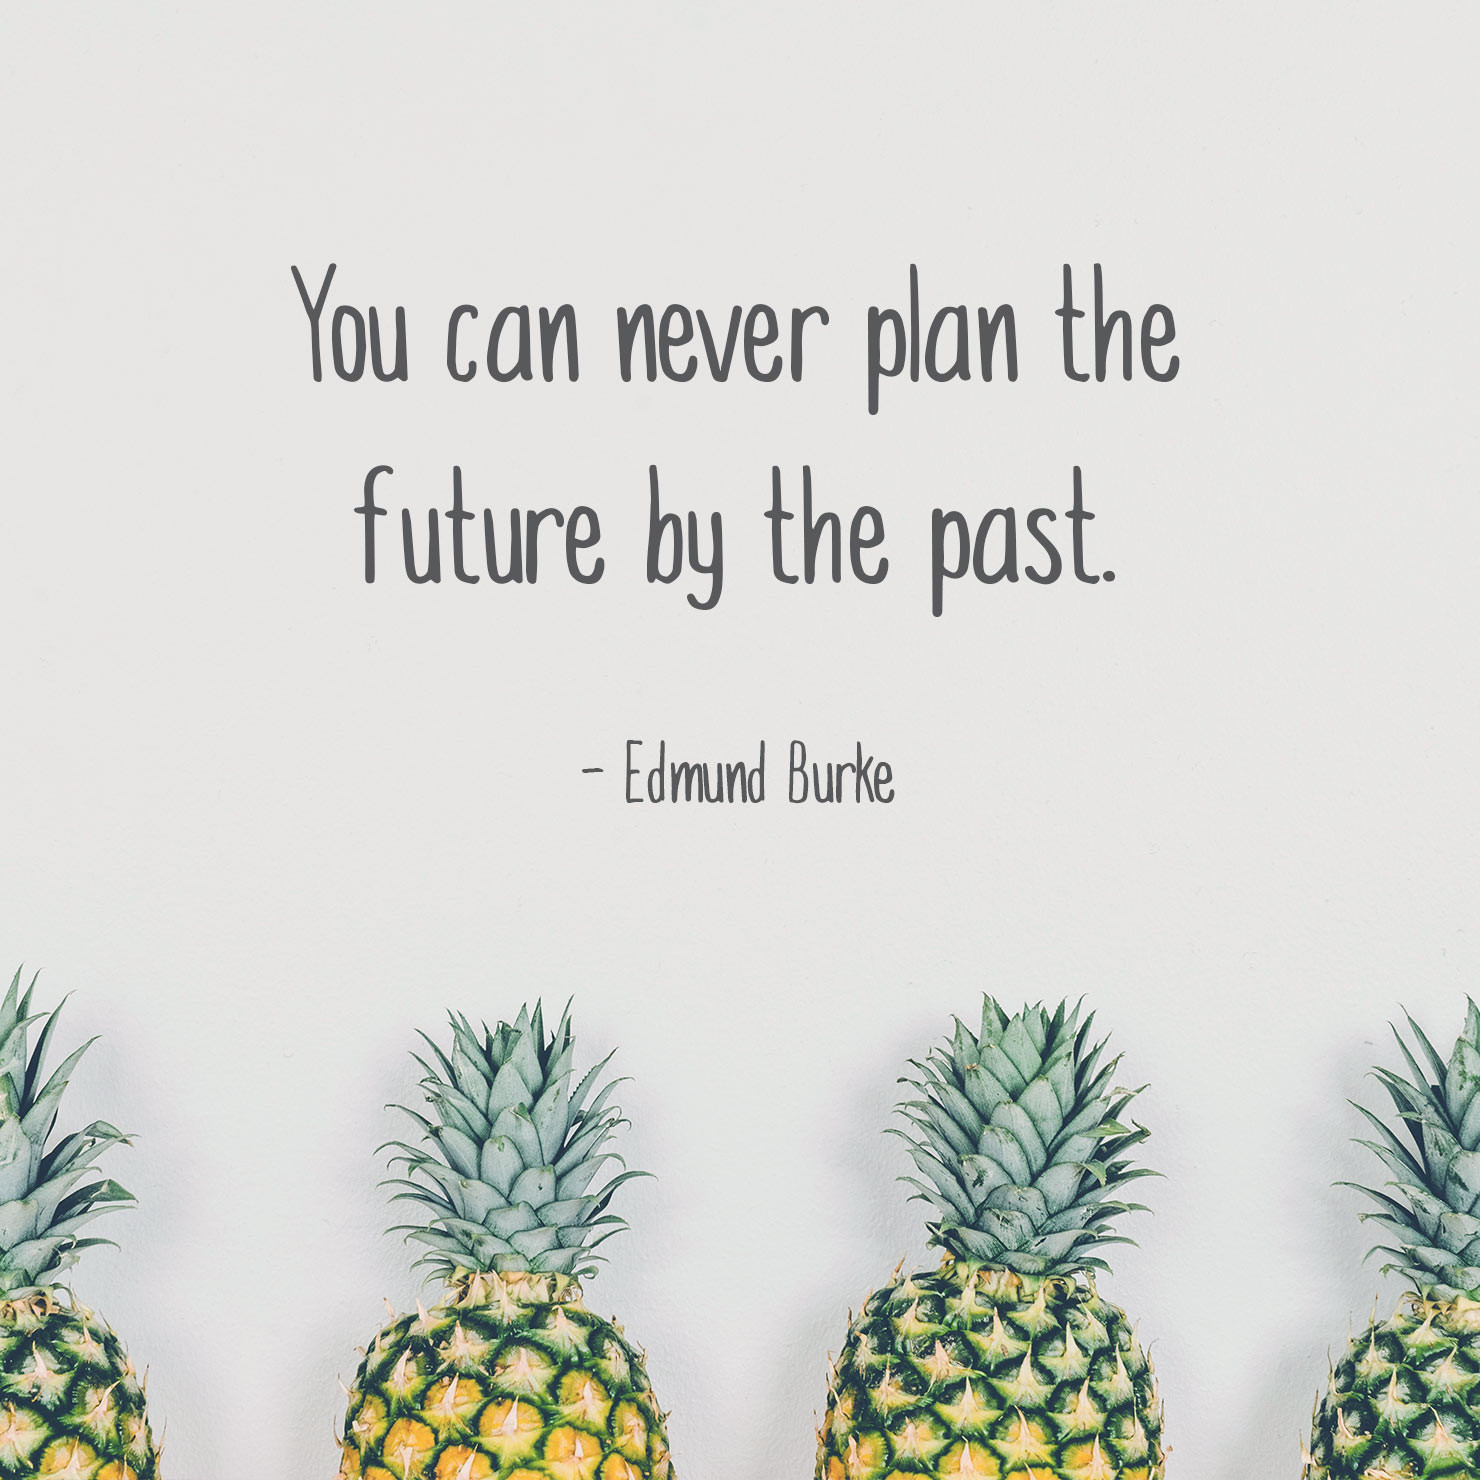 Quotes For Graduation
 Graduation Quotes and Sayings For 2019